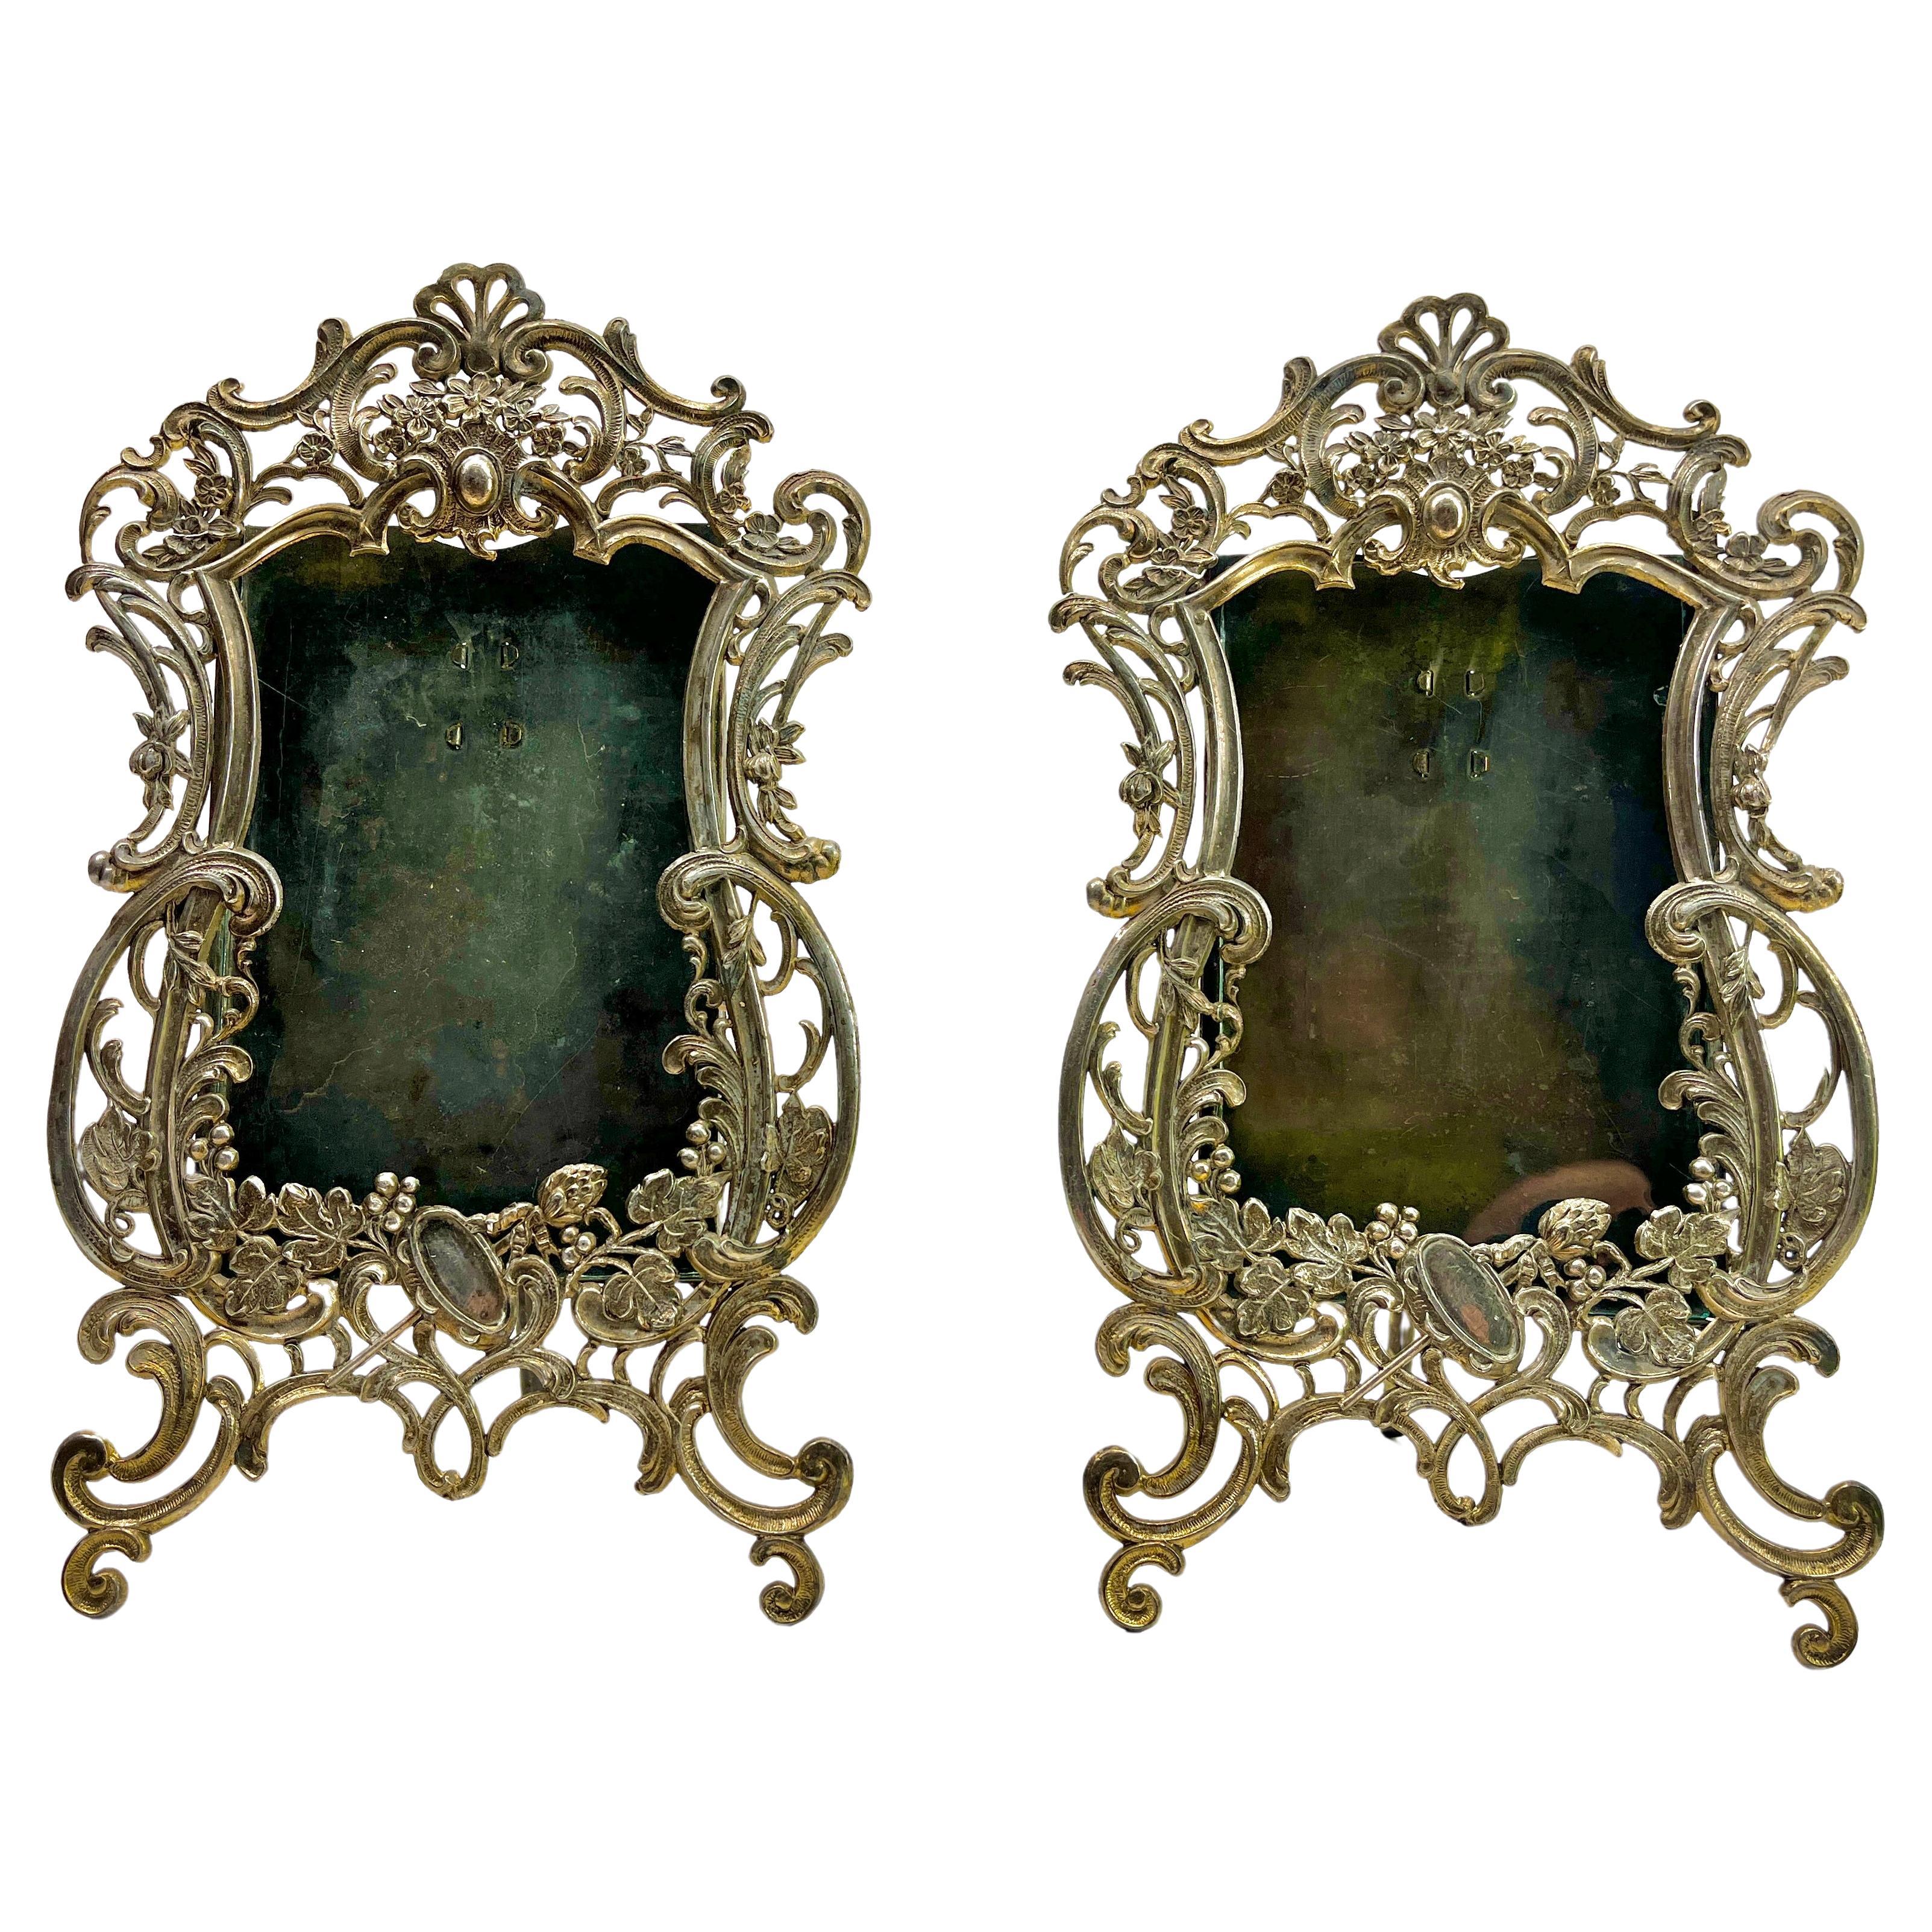 'Lover's Knot' Pair of Picture Frames with glas cover Silver Plate 1860s